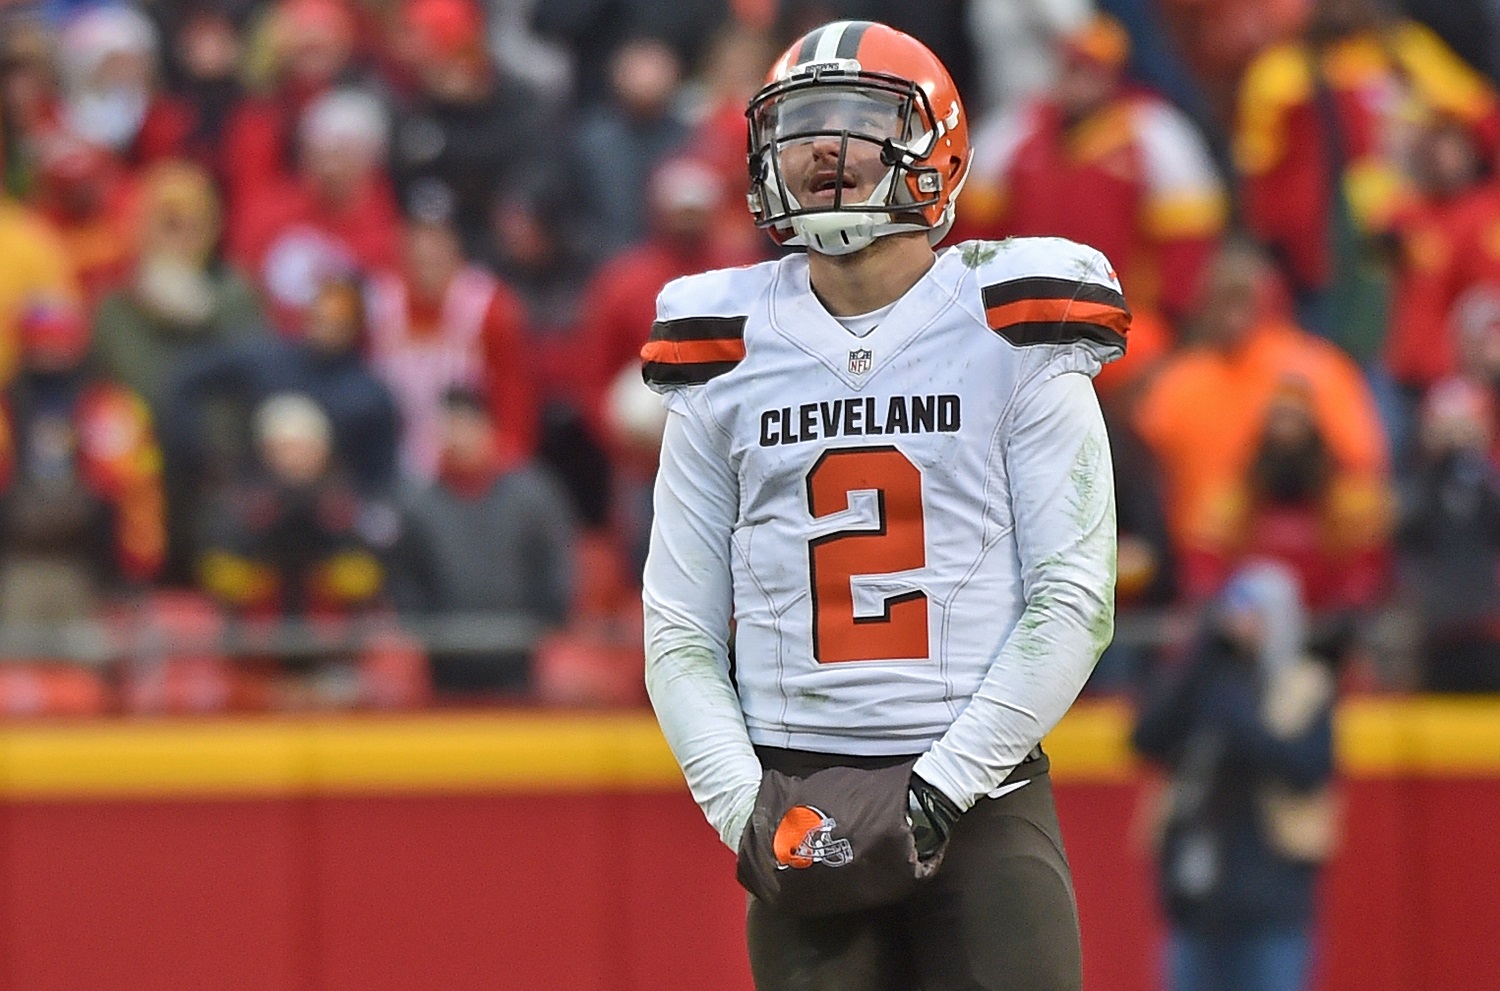 Johnny Manziel highlights the Cleveland Browns' astonishing list of first-round quarterback misses in the NFL draft.